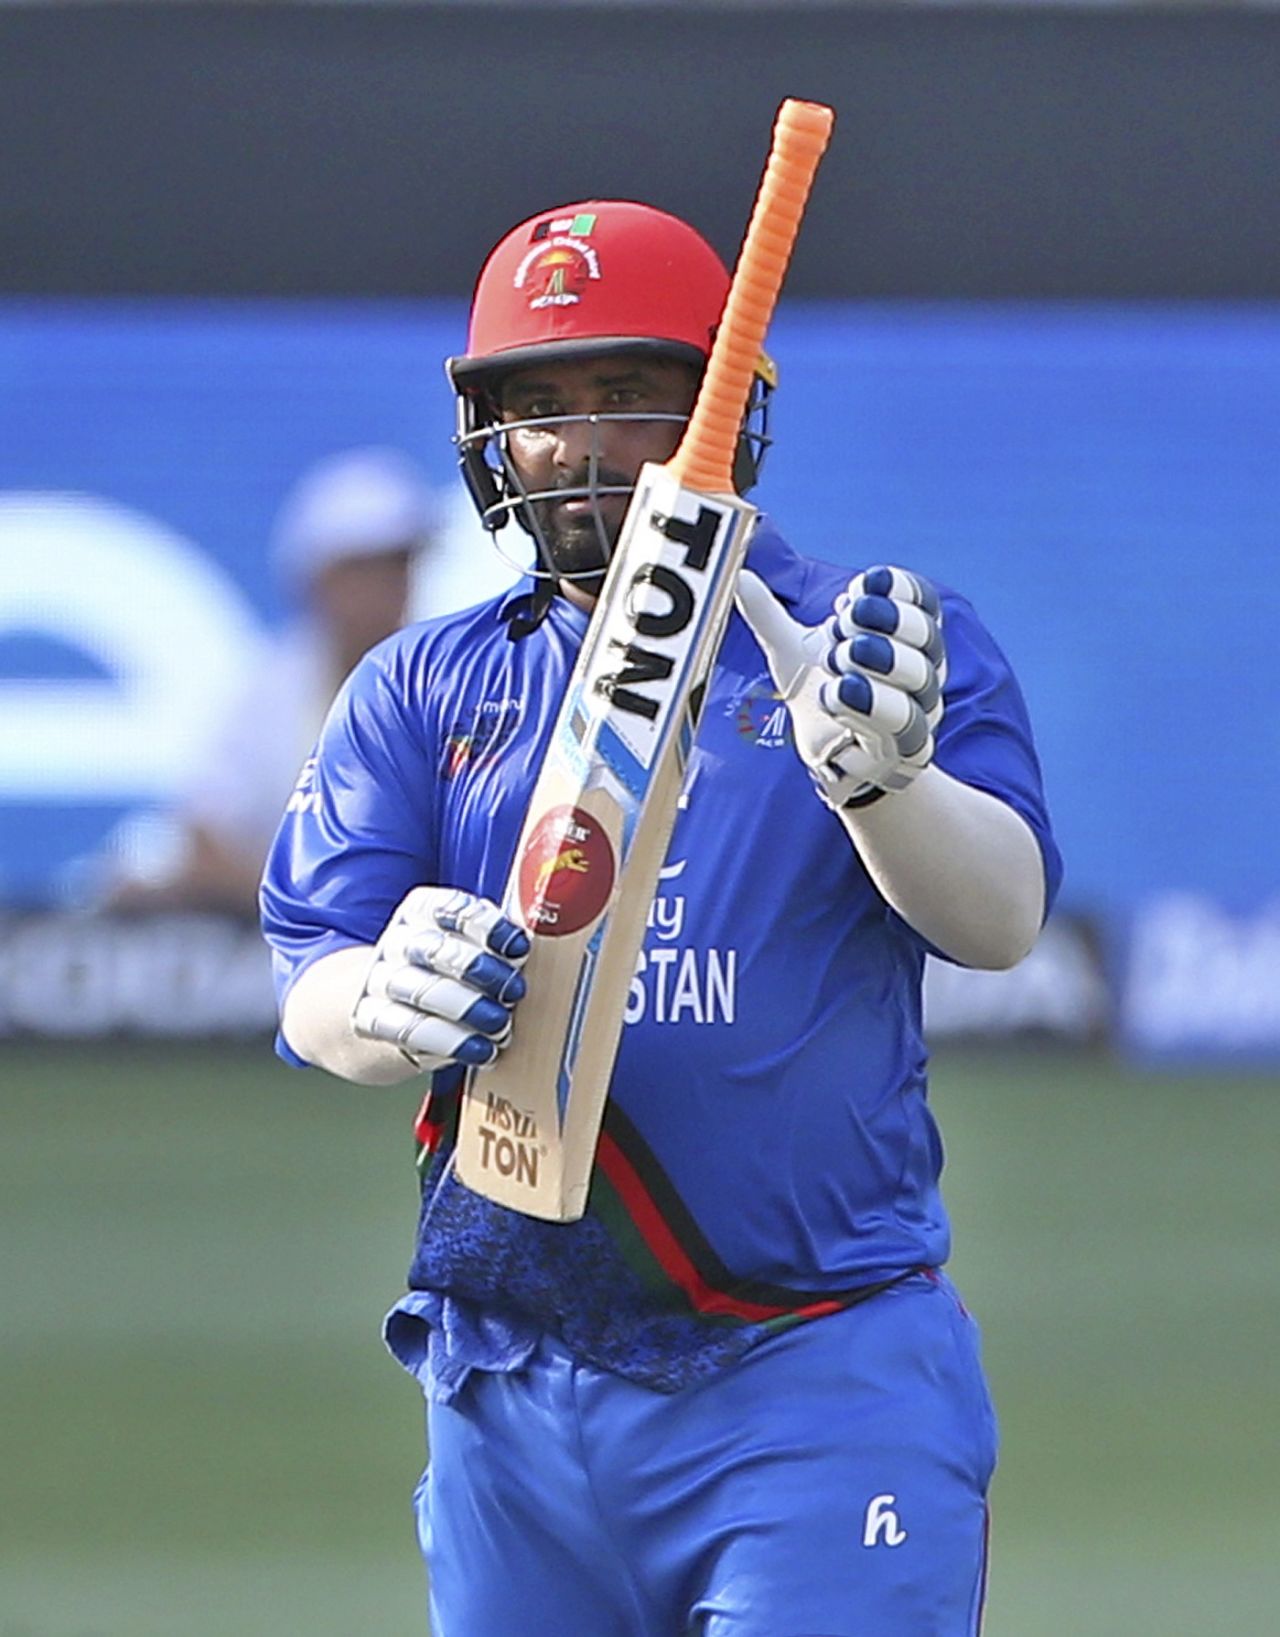 Mohammad Shahzad points to his bat after completing his 14th ODI fifty, Afghanistan v India, Asia Cup 2018, Dubai, September 25, 2018